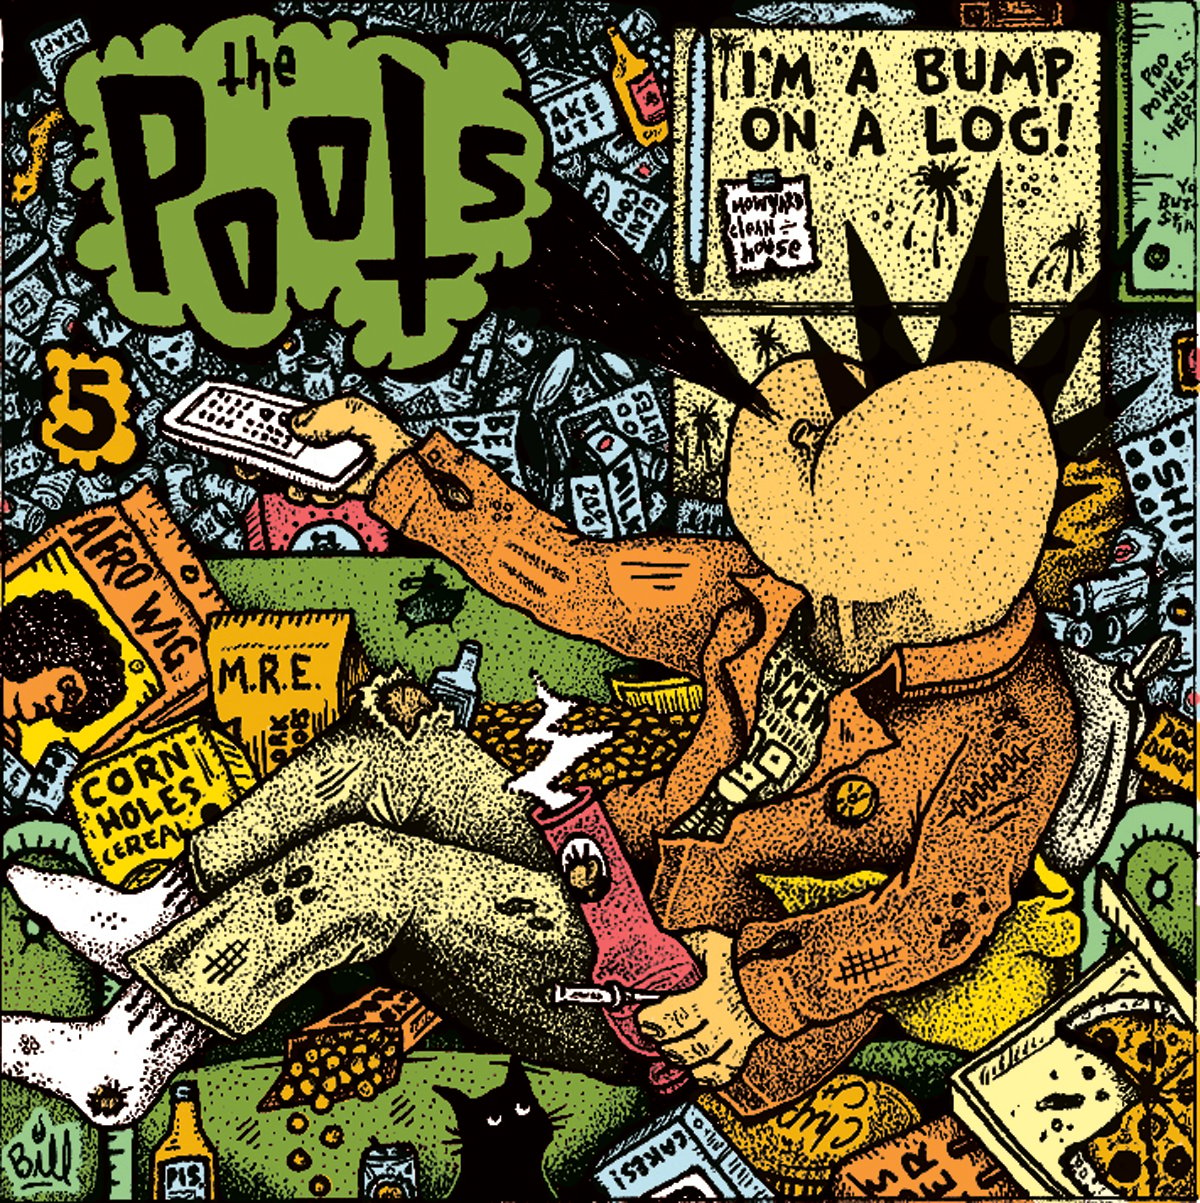 Image of The Poots "Bump On A Log" CD